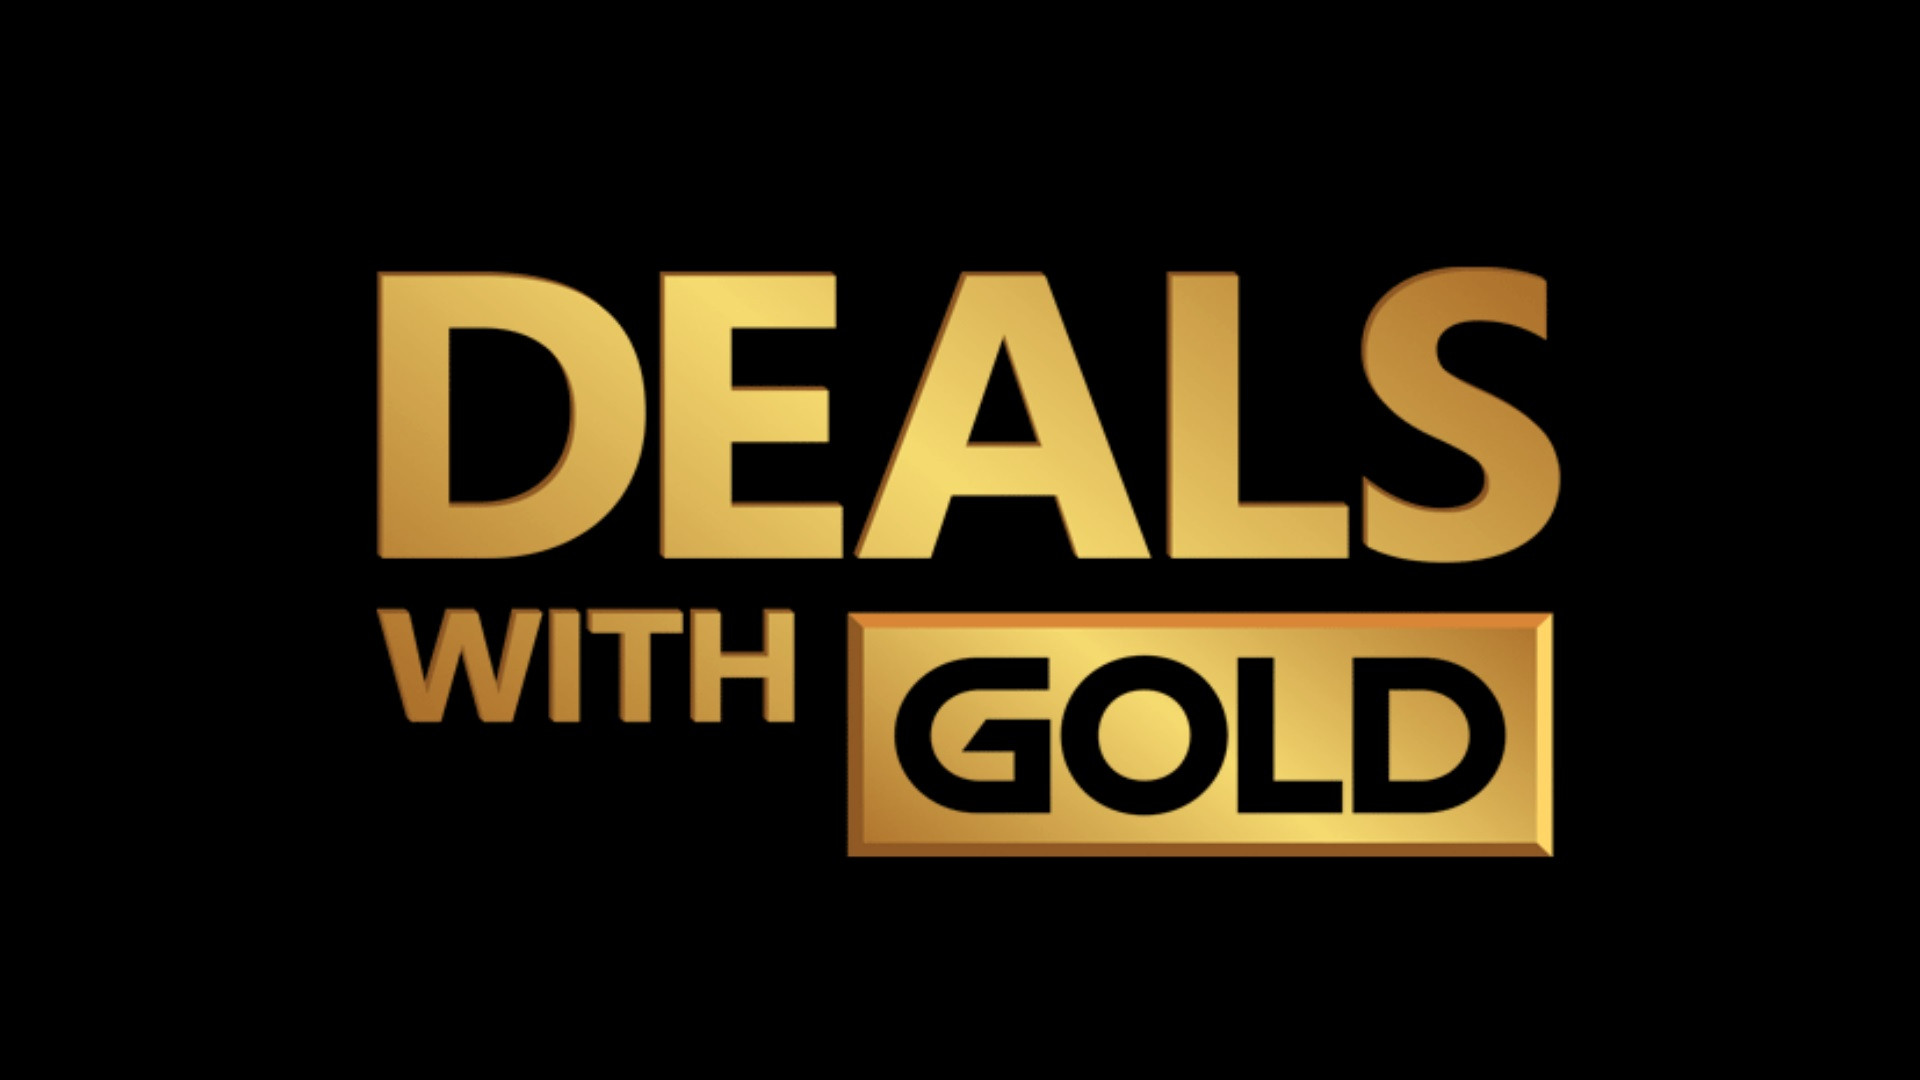 Deals with Gold semaine 09